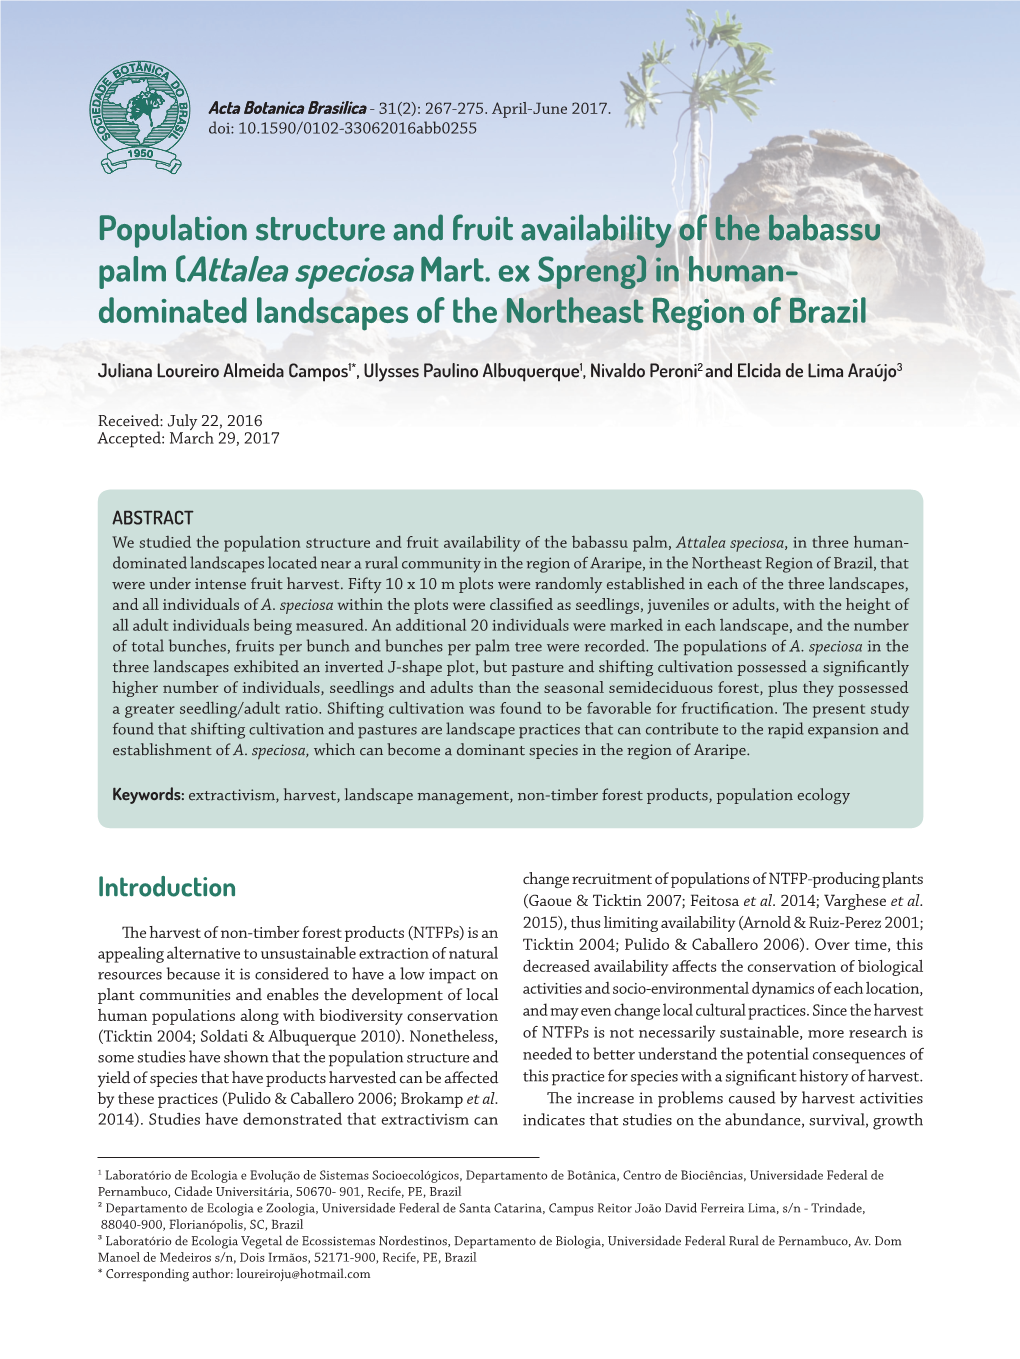 Population Structure and Fruit Availability of the Babassu Palm (Attalea Speciosa Mart